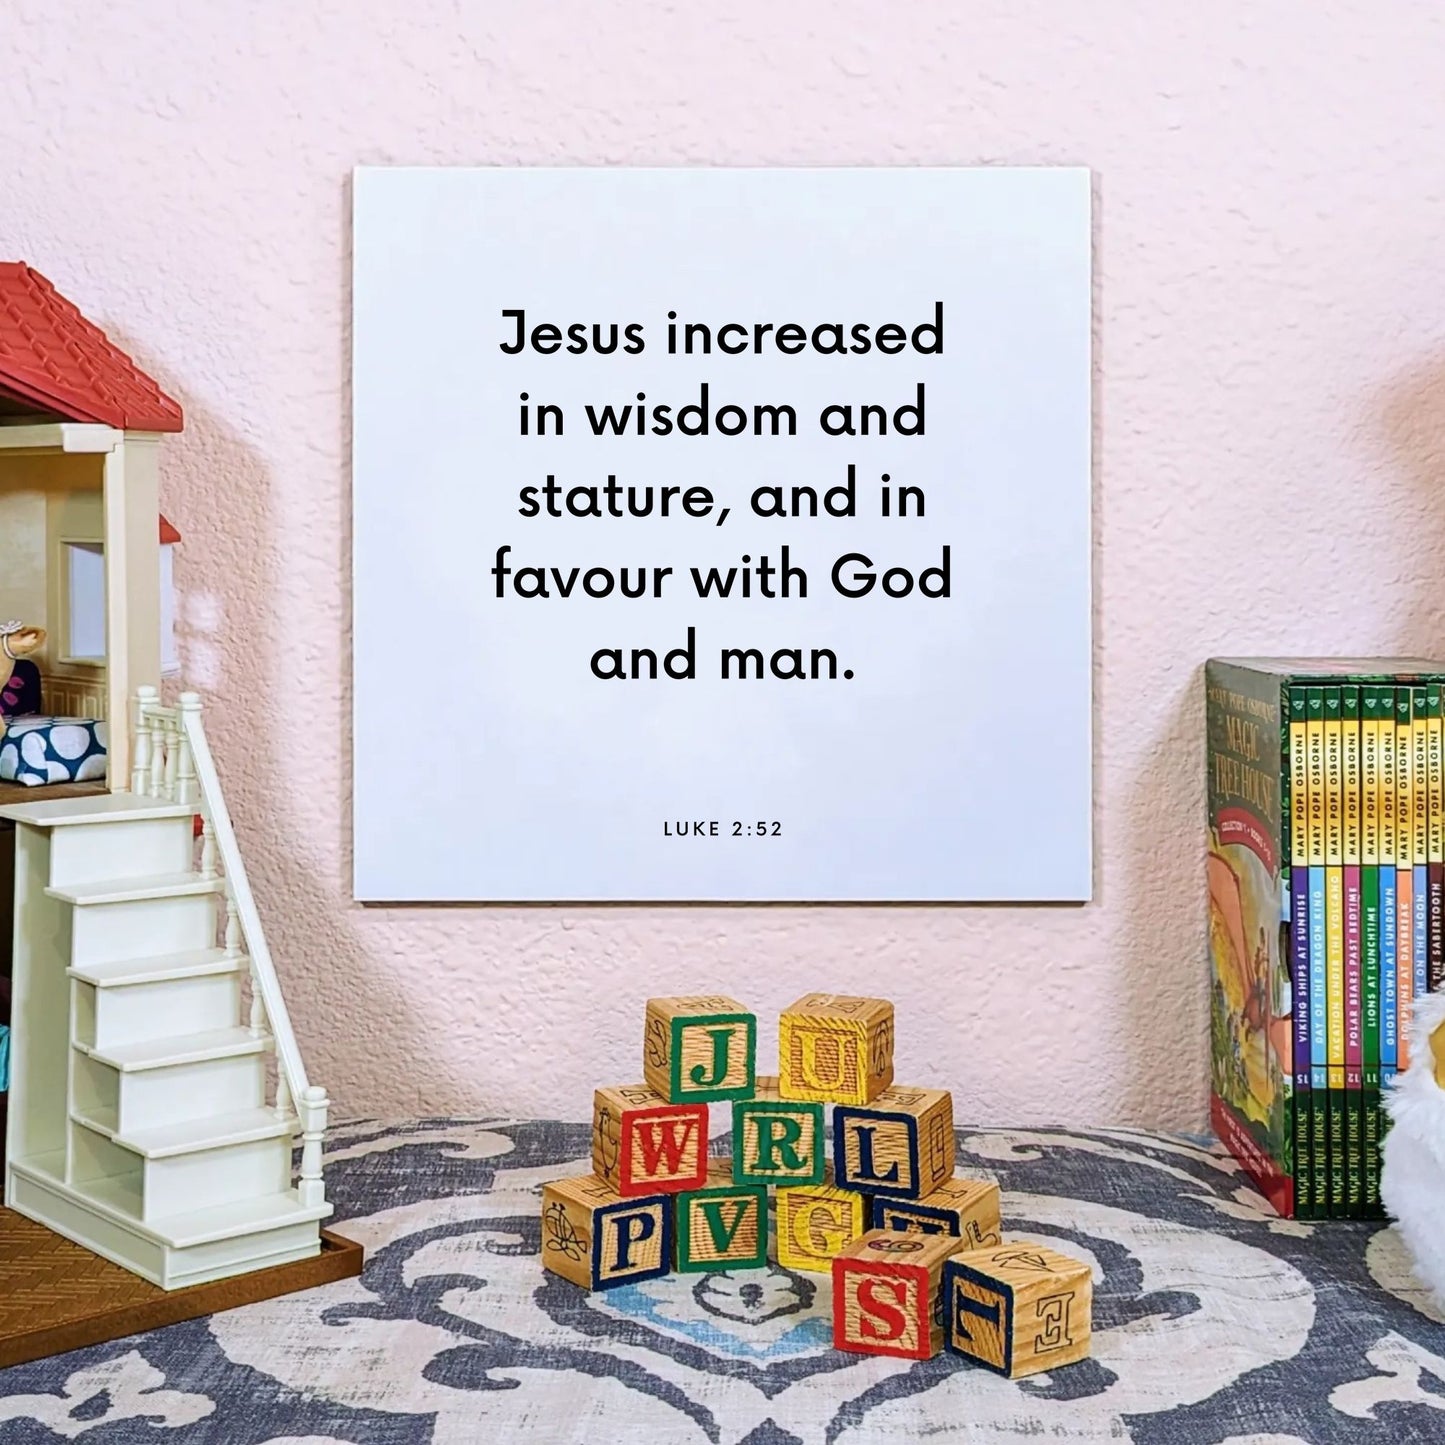 Playroom mouting of the scripture tile for Luke 2:52 - "Jesus increased in wisdom and stature"